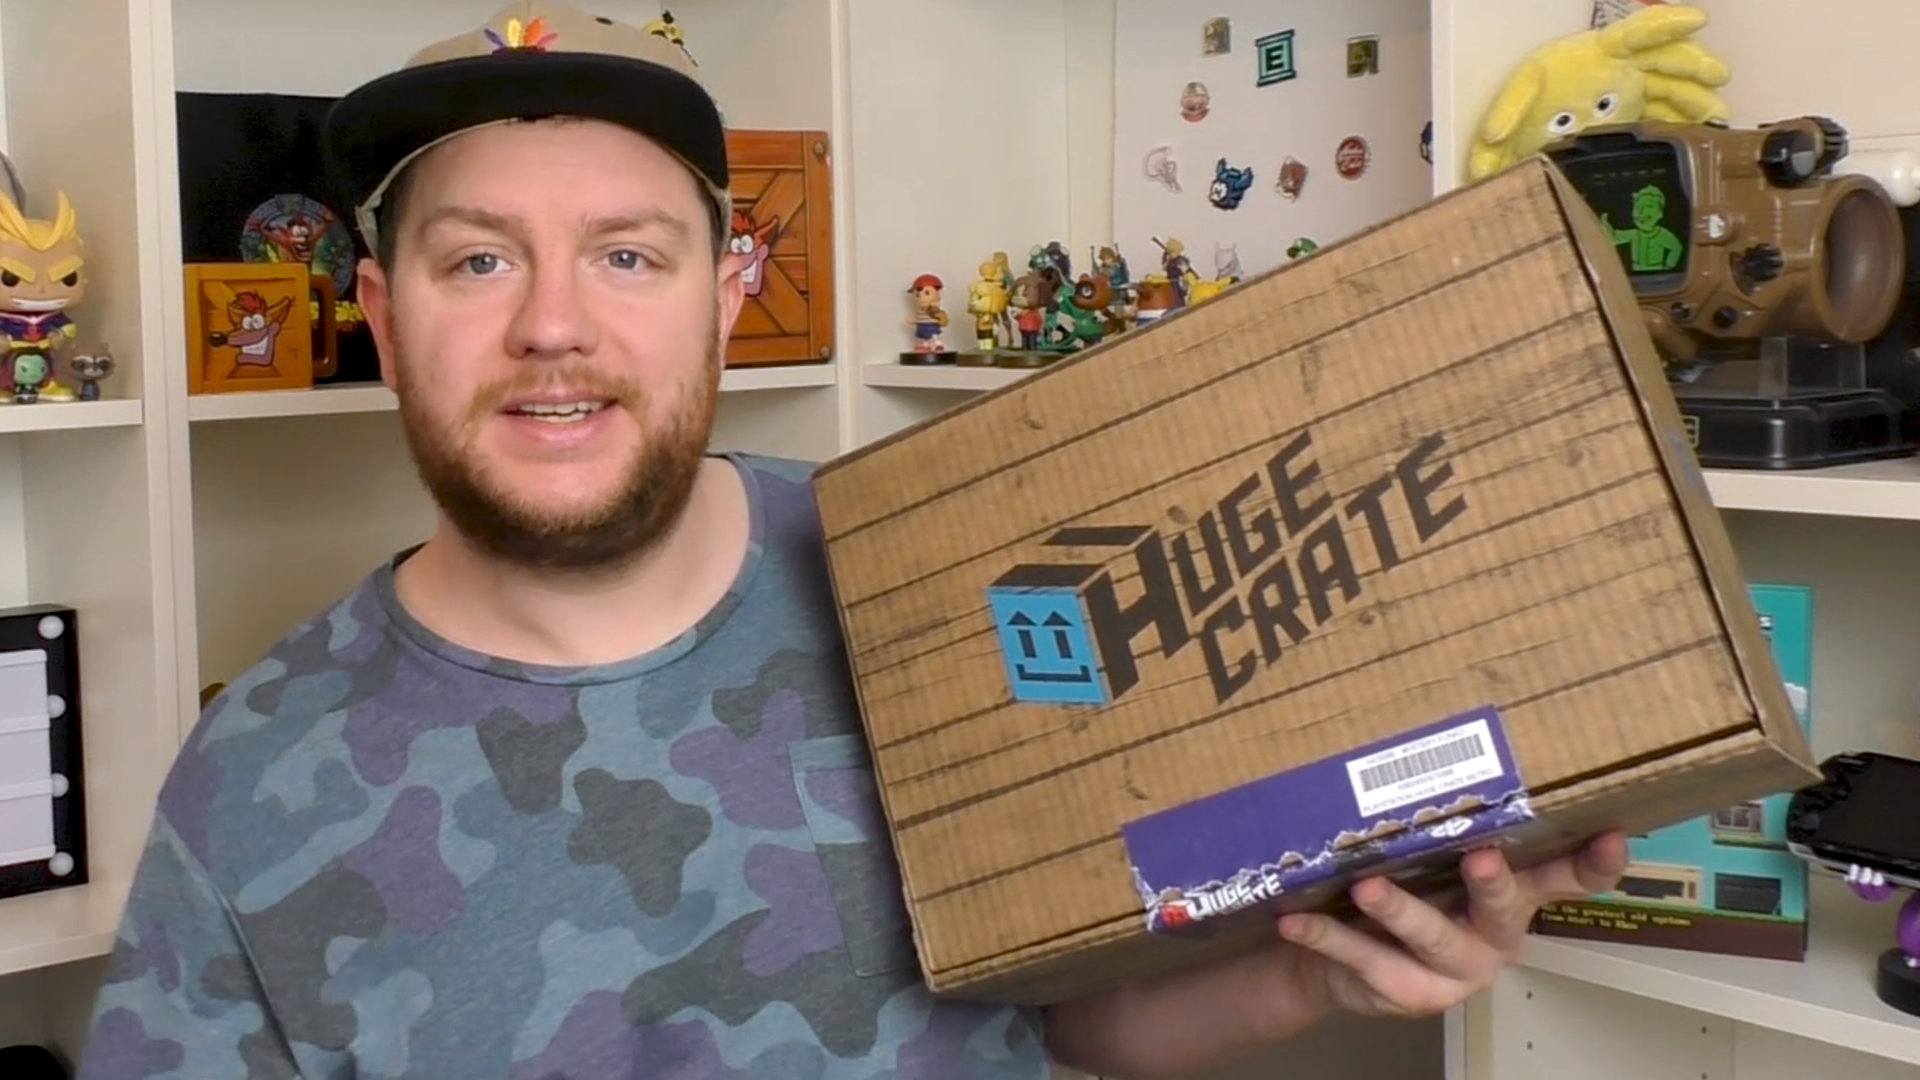 A photo of me with the Huge Crate Retro PlayStation bundle box